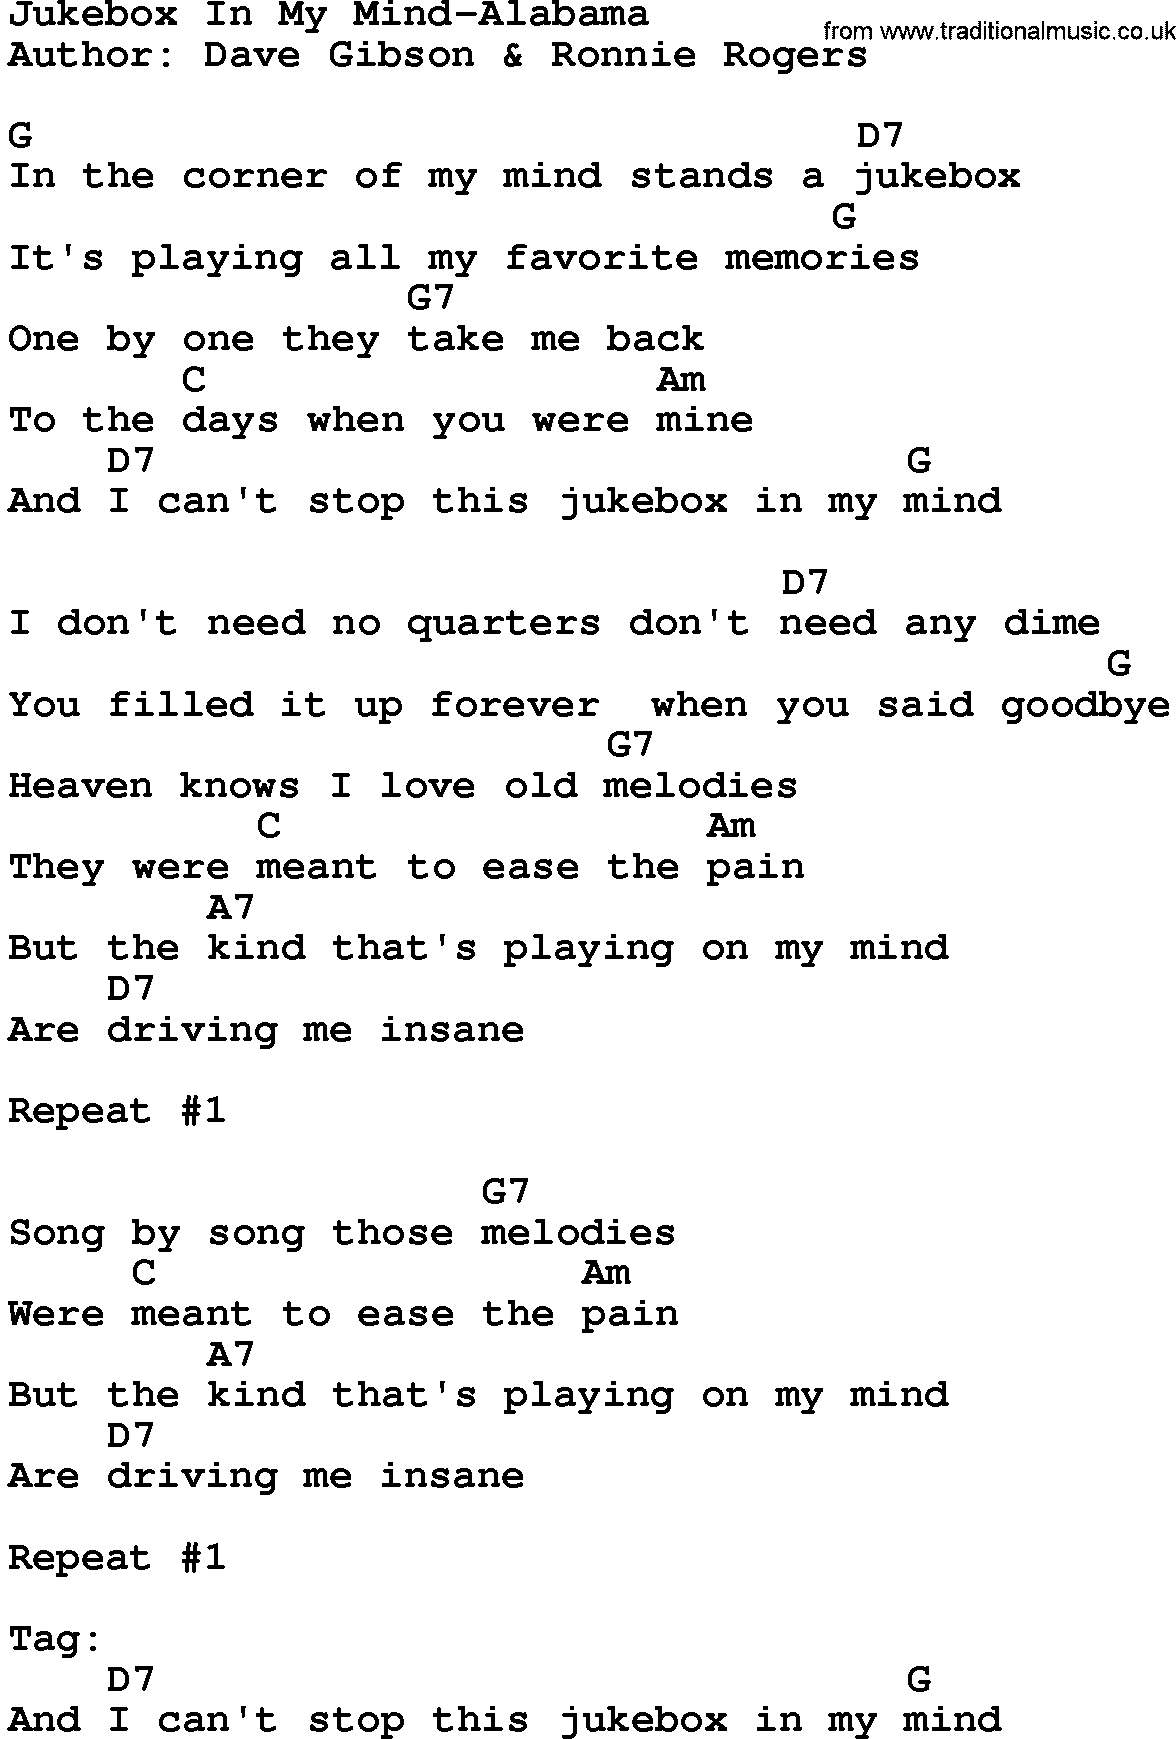 Country music song: Jukebox In My Mind-Alabama lyrics and chords